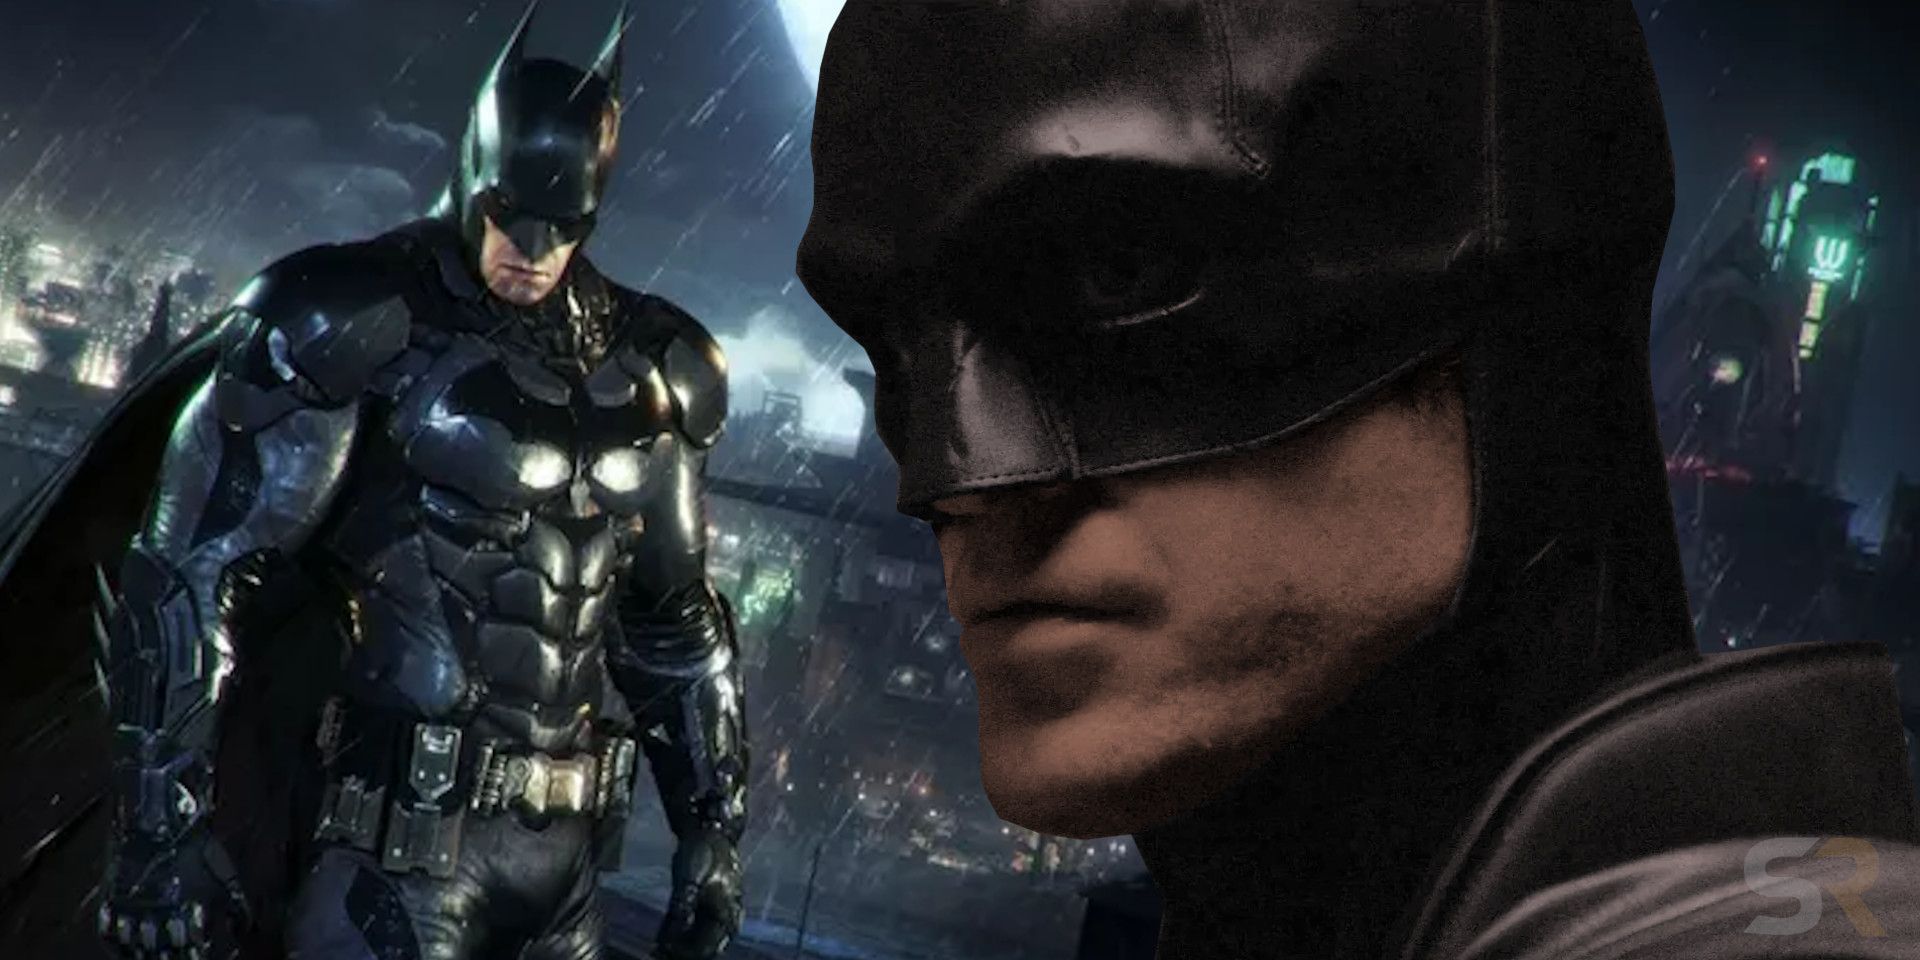 Robert Pattinsons Batsuit Is Inspired By Arkham What This Means For The Batman